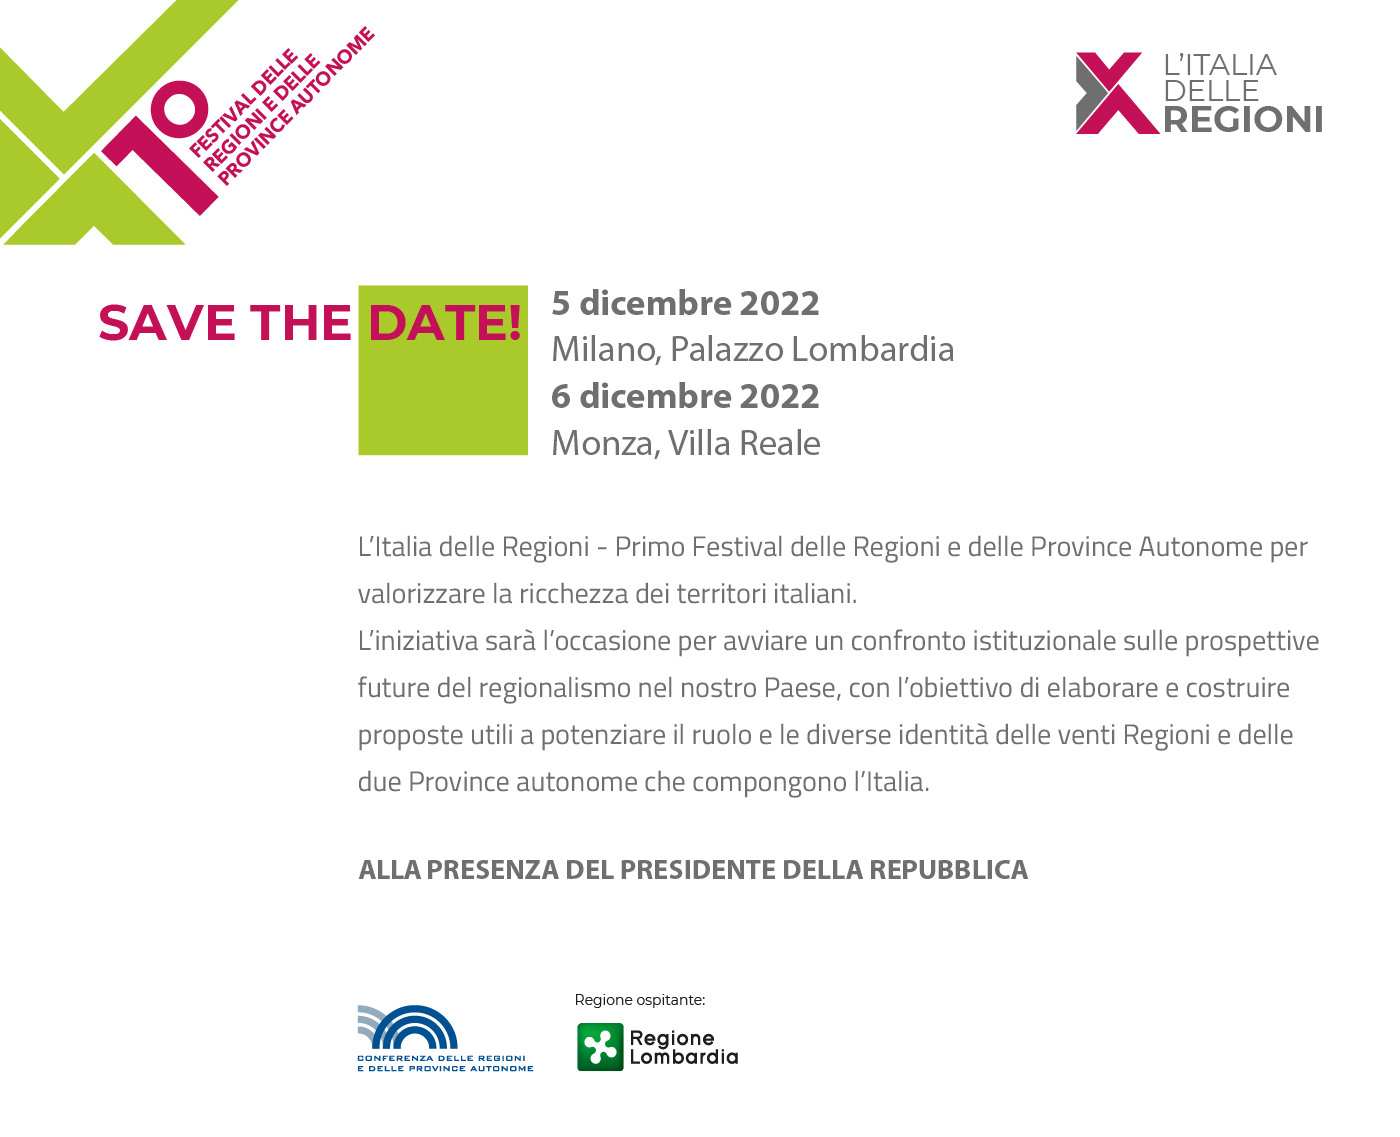 file/ELEMENTO_NEWSLETTER/24935/Save-the-date_UFFICIALE_festival_regioni_5_6_12_22_NL.png